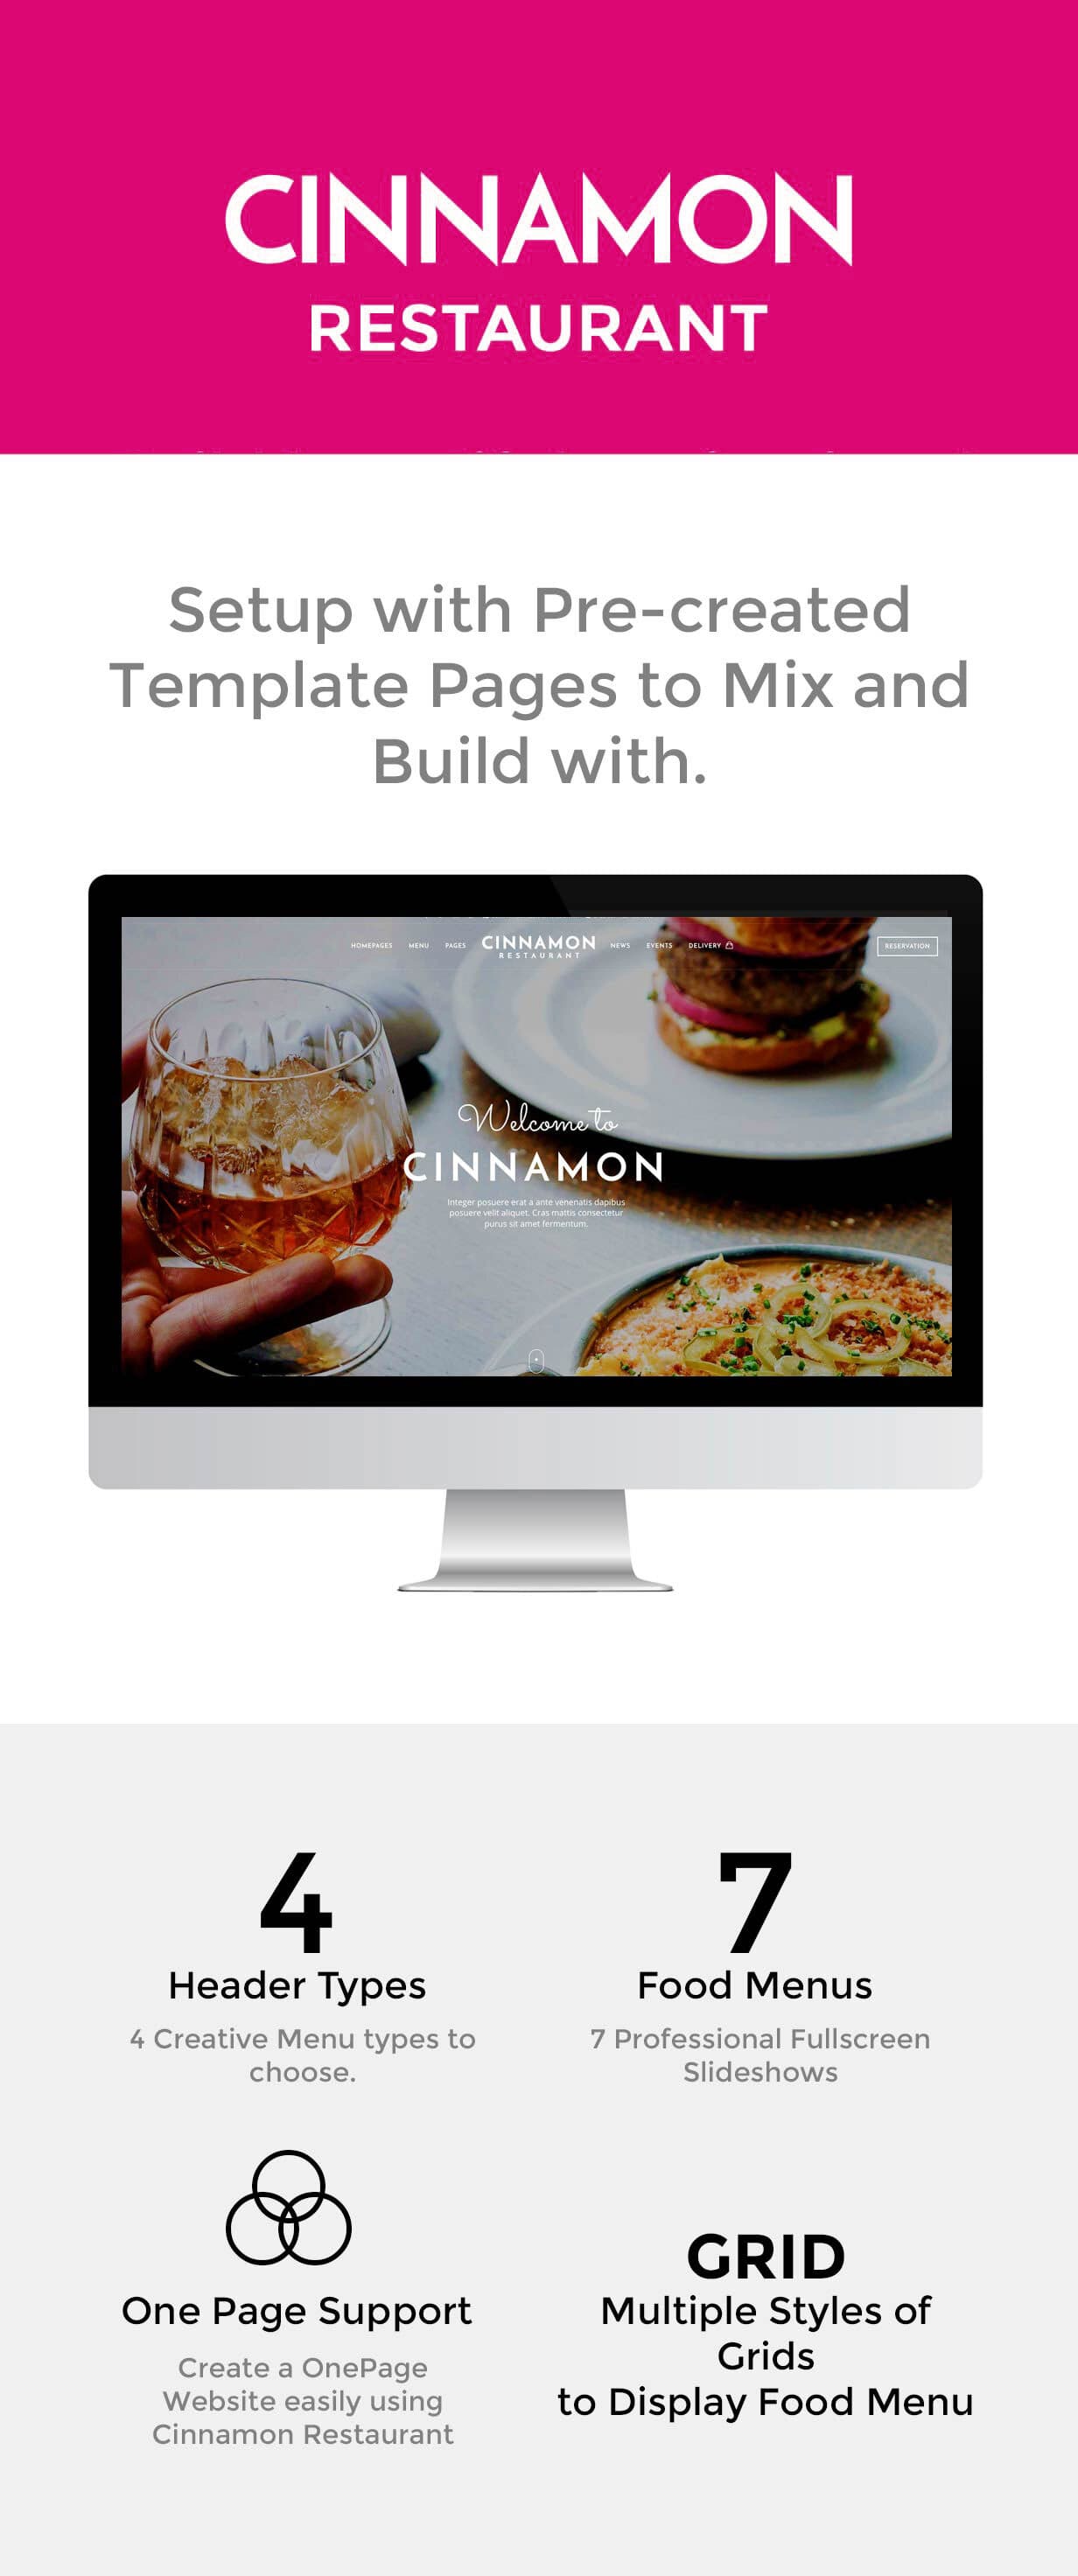 Preview "Cinnamon Restaurant Theme for WordPress" on the monitor.